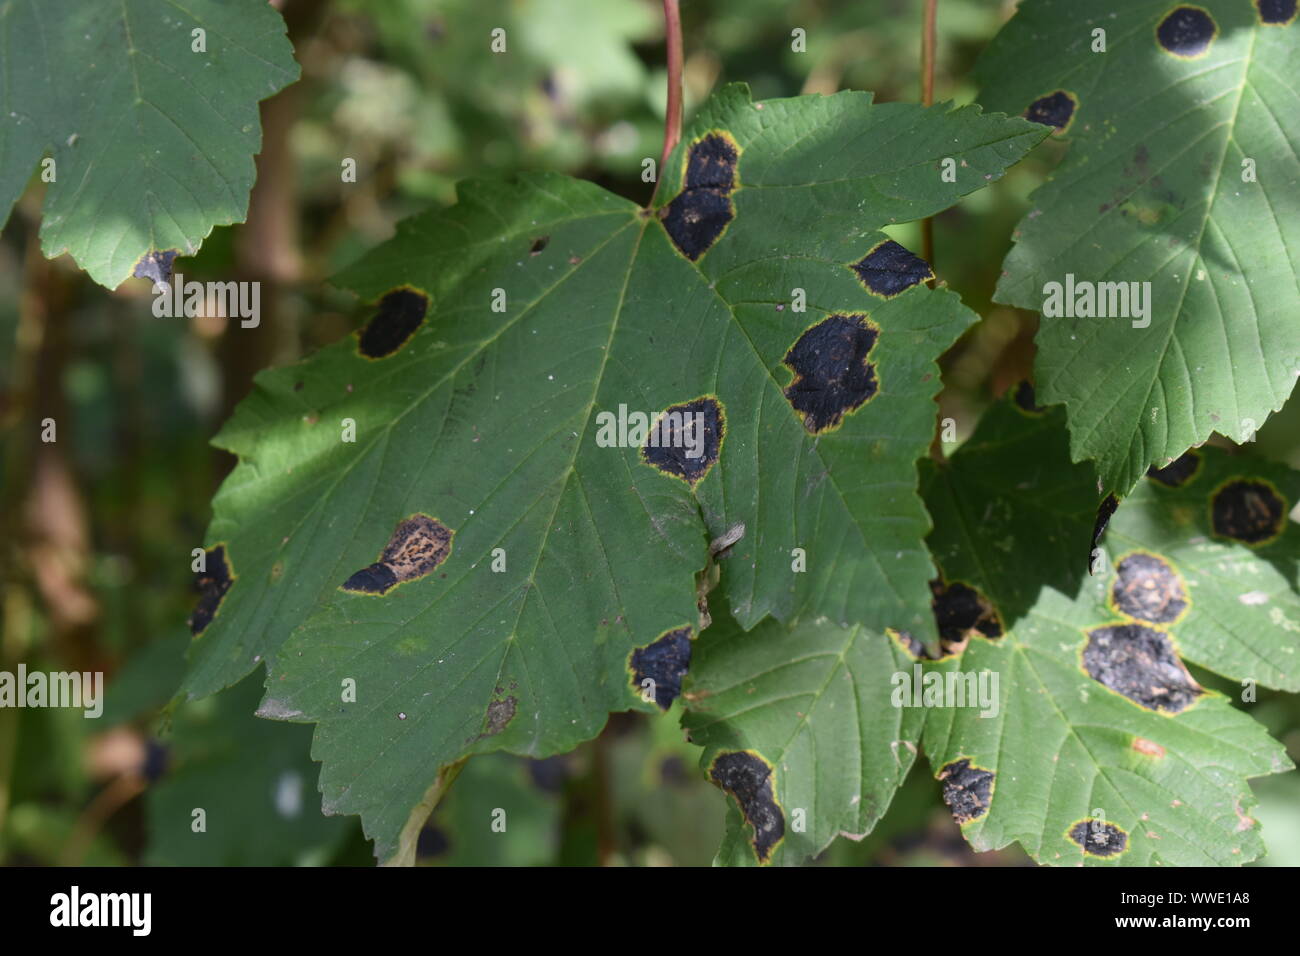 Tar spot on the leaves of a sycamore tree.  Tar spot is a disease caused by a fungus Rhytisma acerinum. It does not cause lasting damage to the tree. Stock Photo